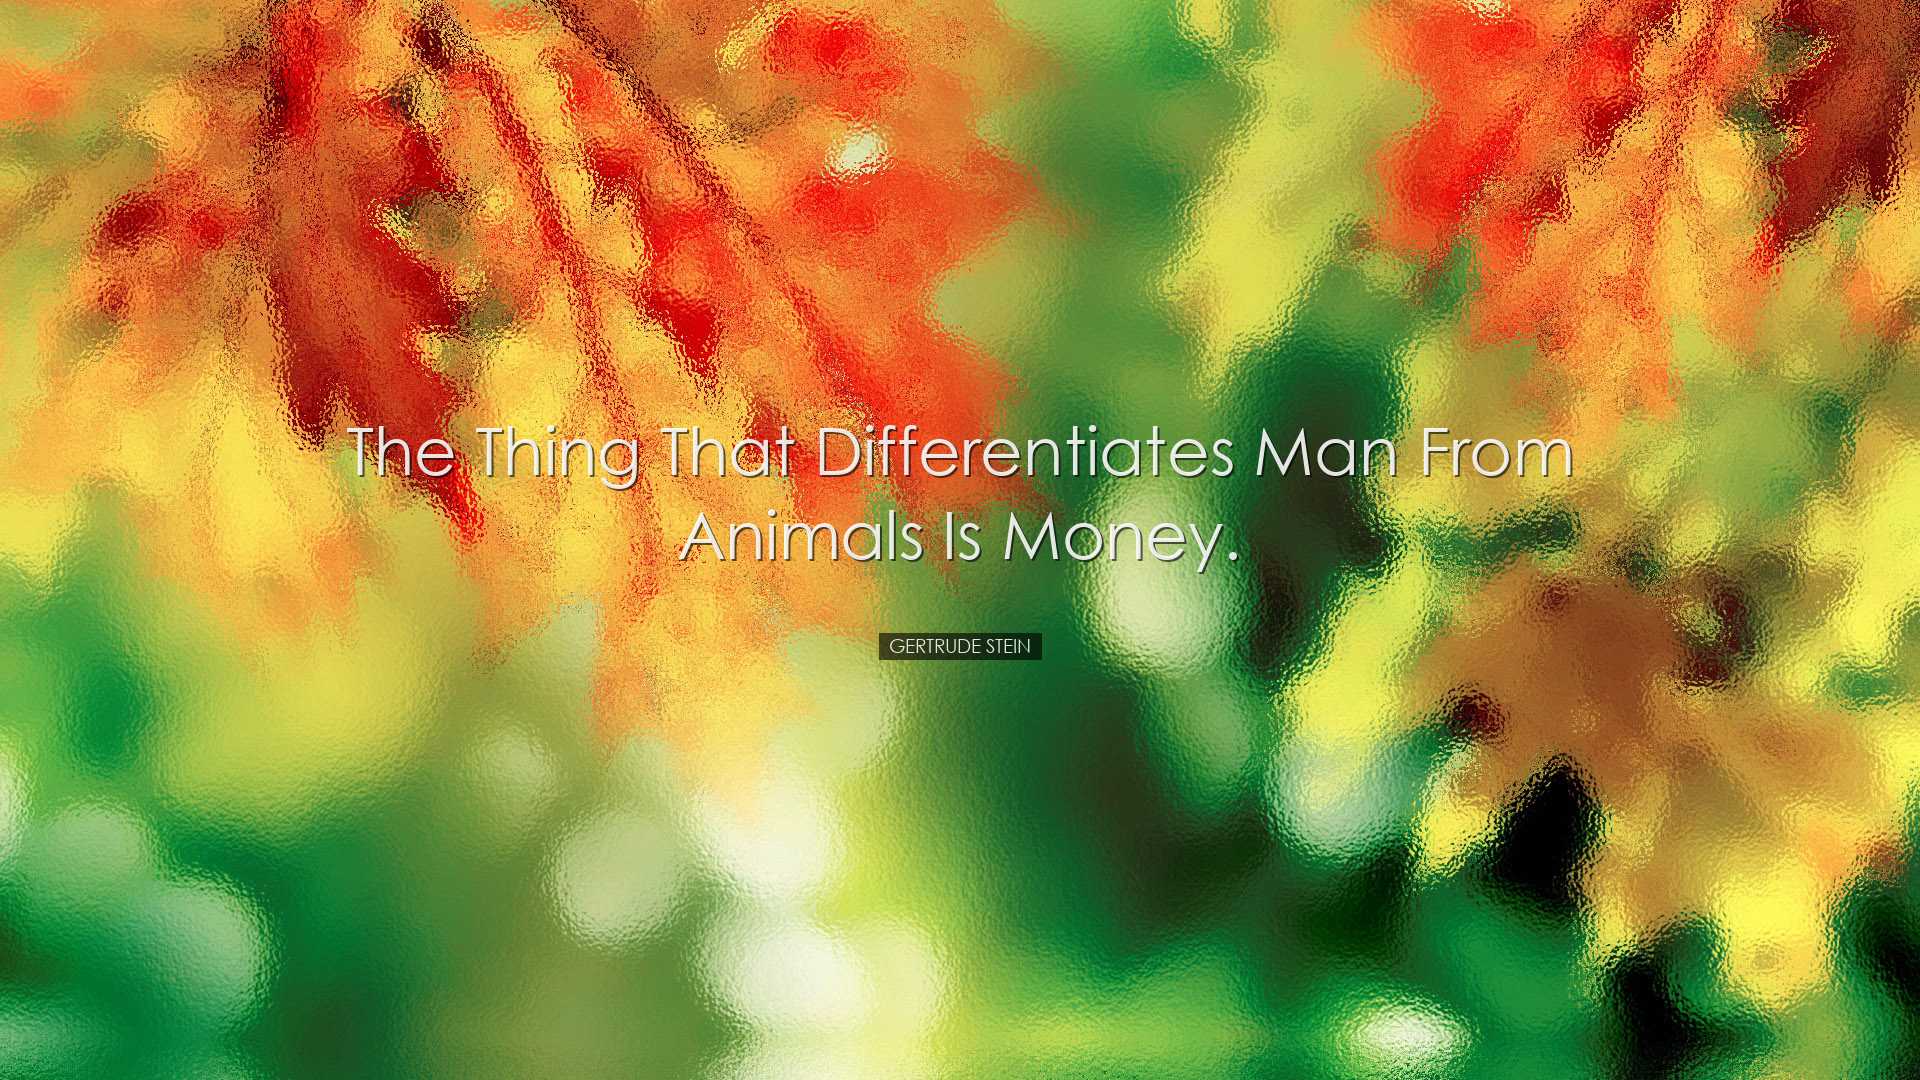 The thing that differentiates man from animals is money. - Gertrud